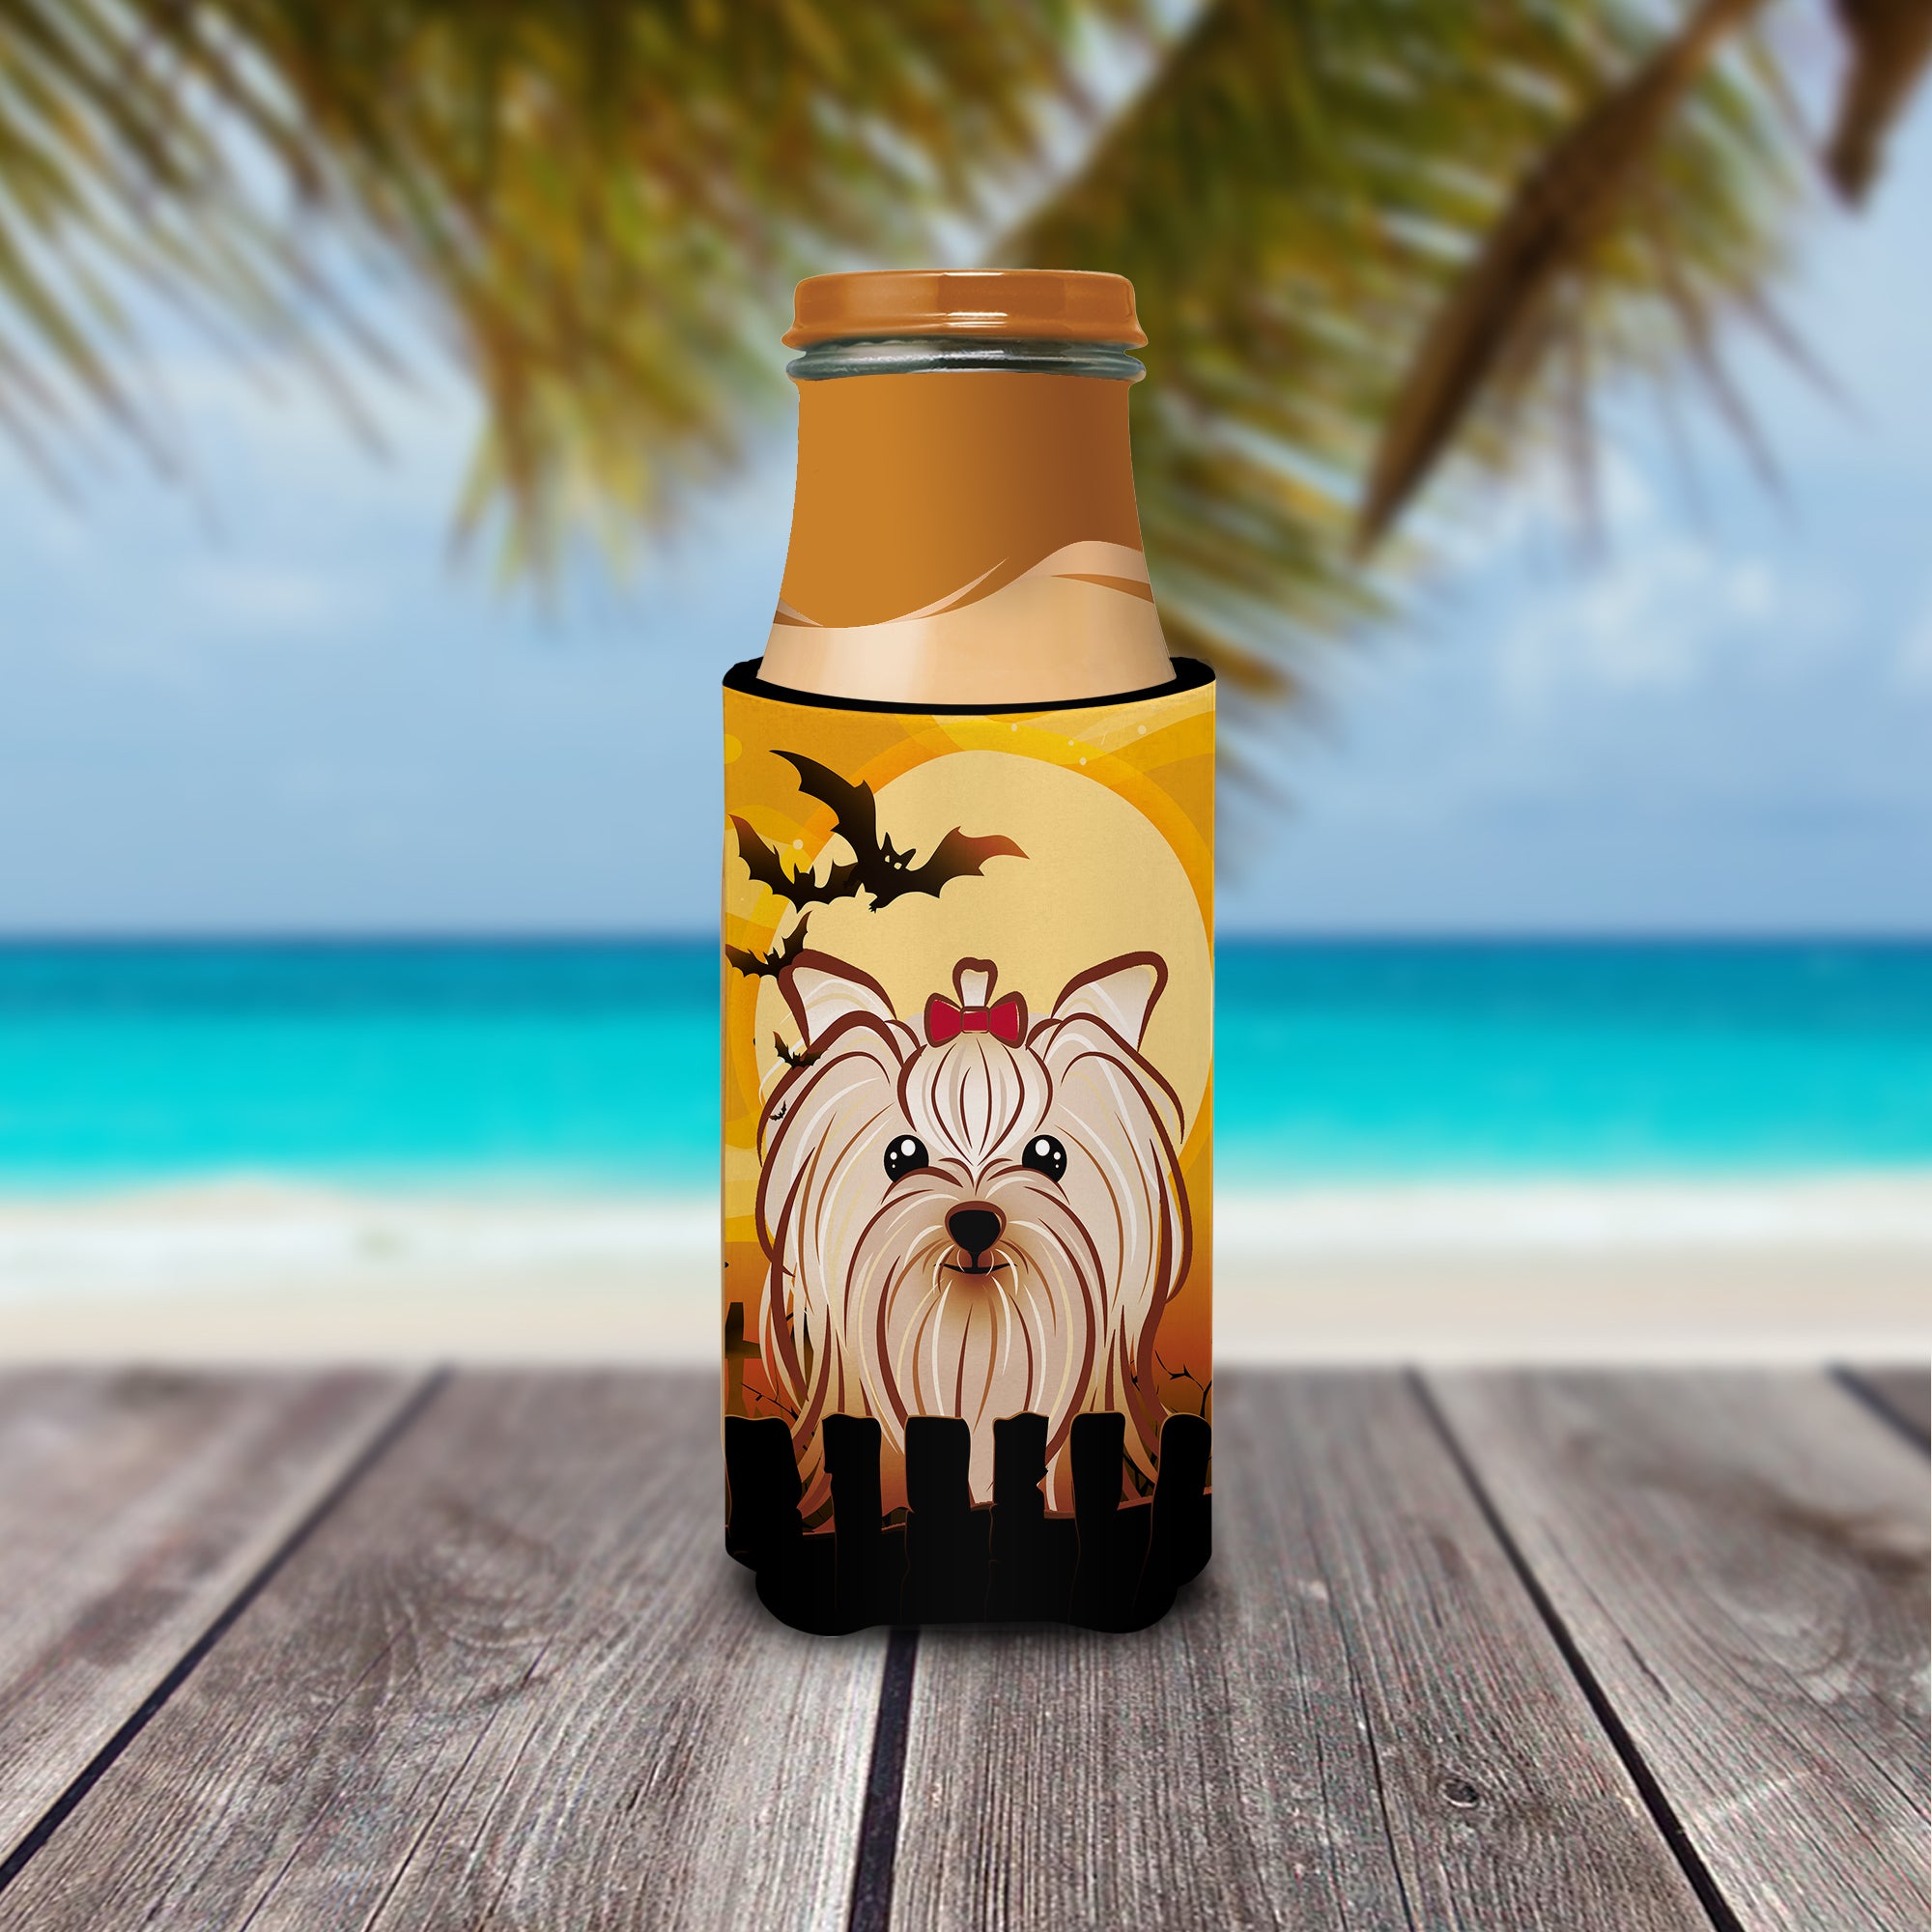 Halloween Yorkie Yorkshire Terrier Ultra Beverage Insulators for slim cans BB1762MUK  the-store.com.